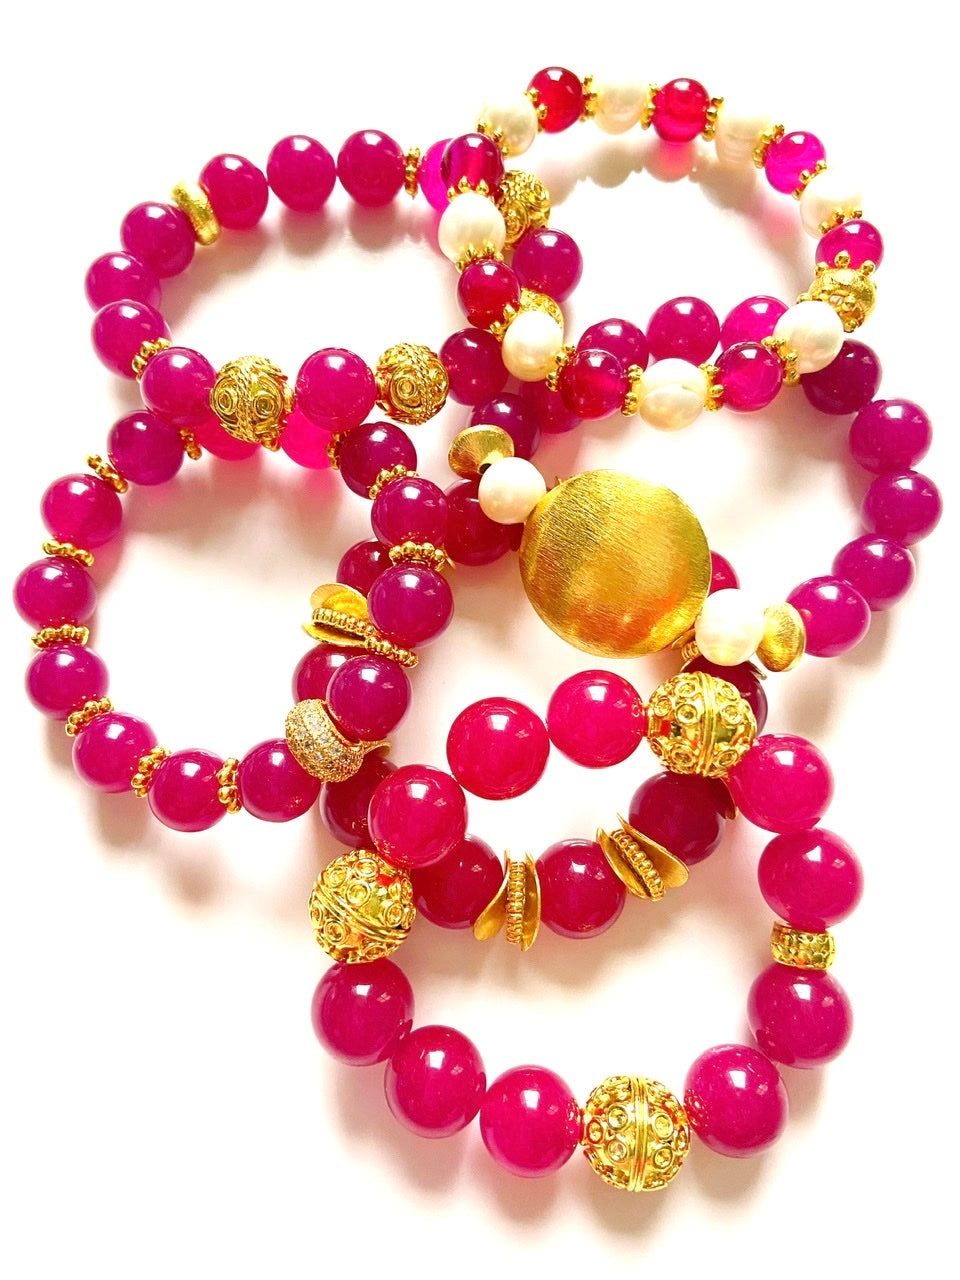 Pretty Rose Red Ruby with Freshwater Baroque Pearls and Gold Vermeil Beaded Bracelet